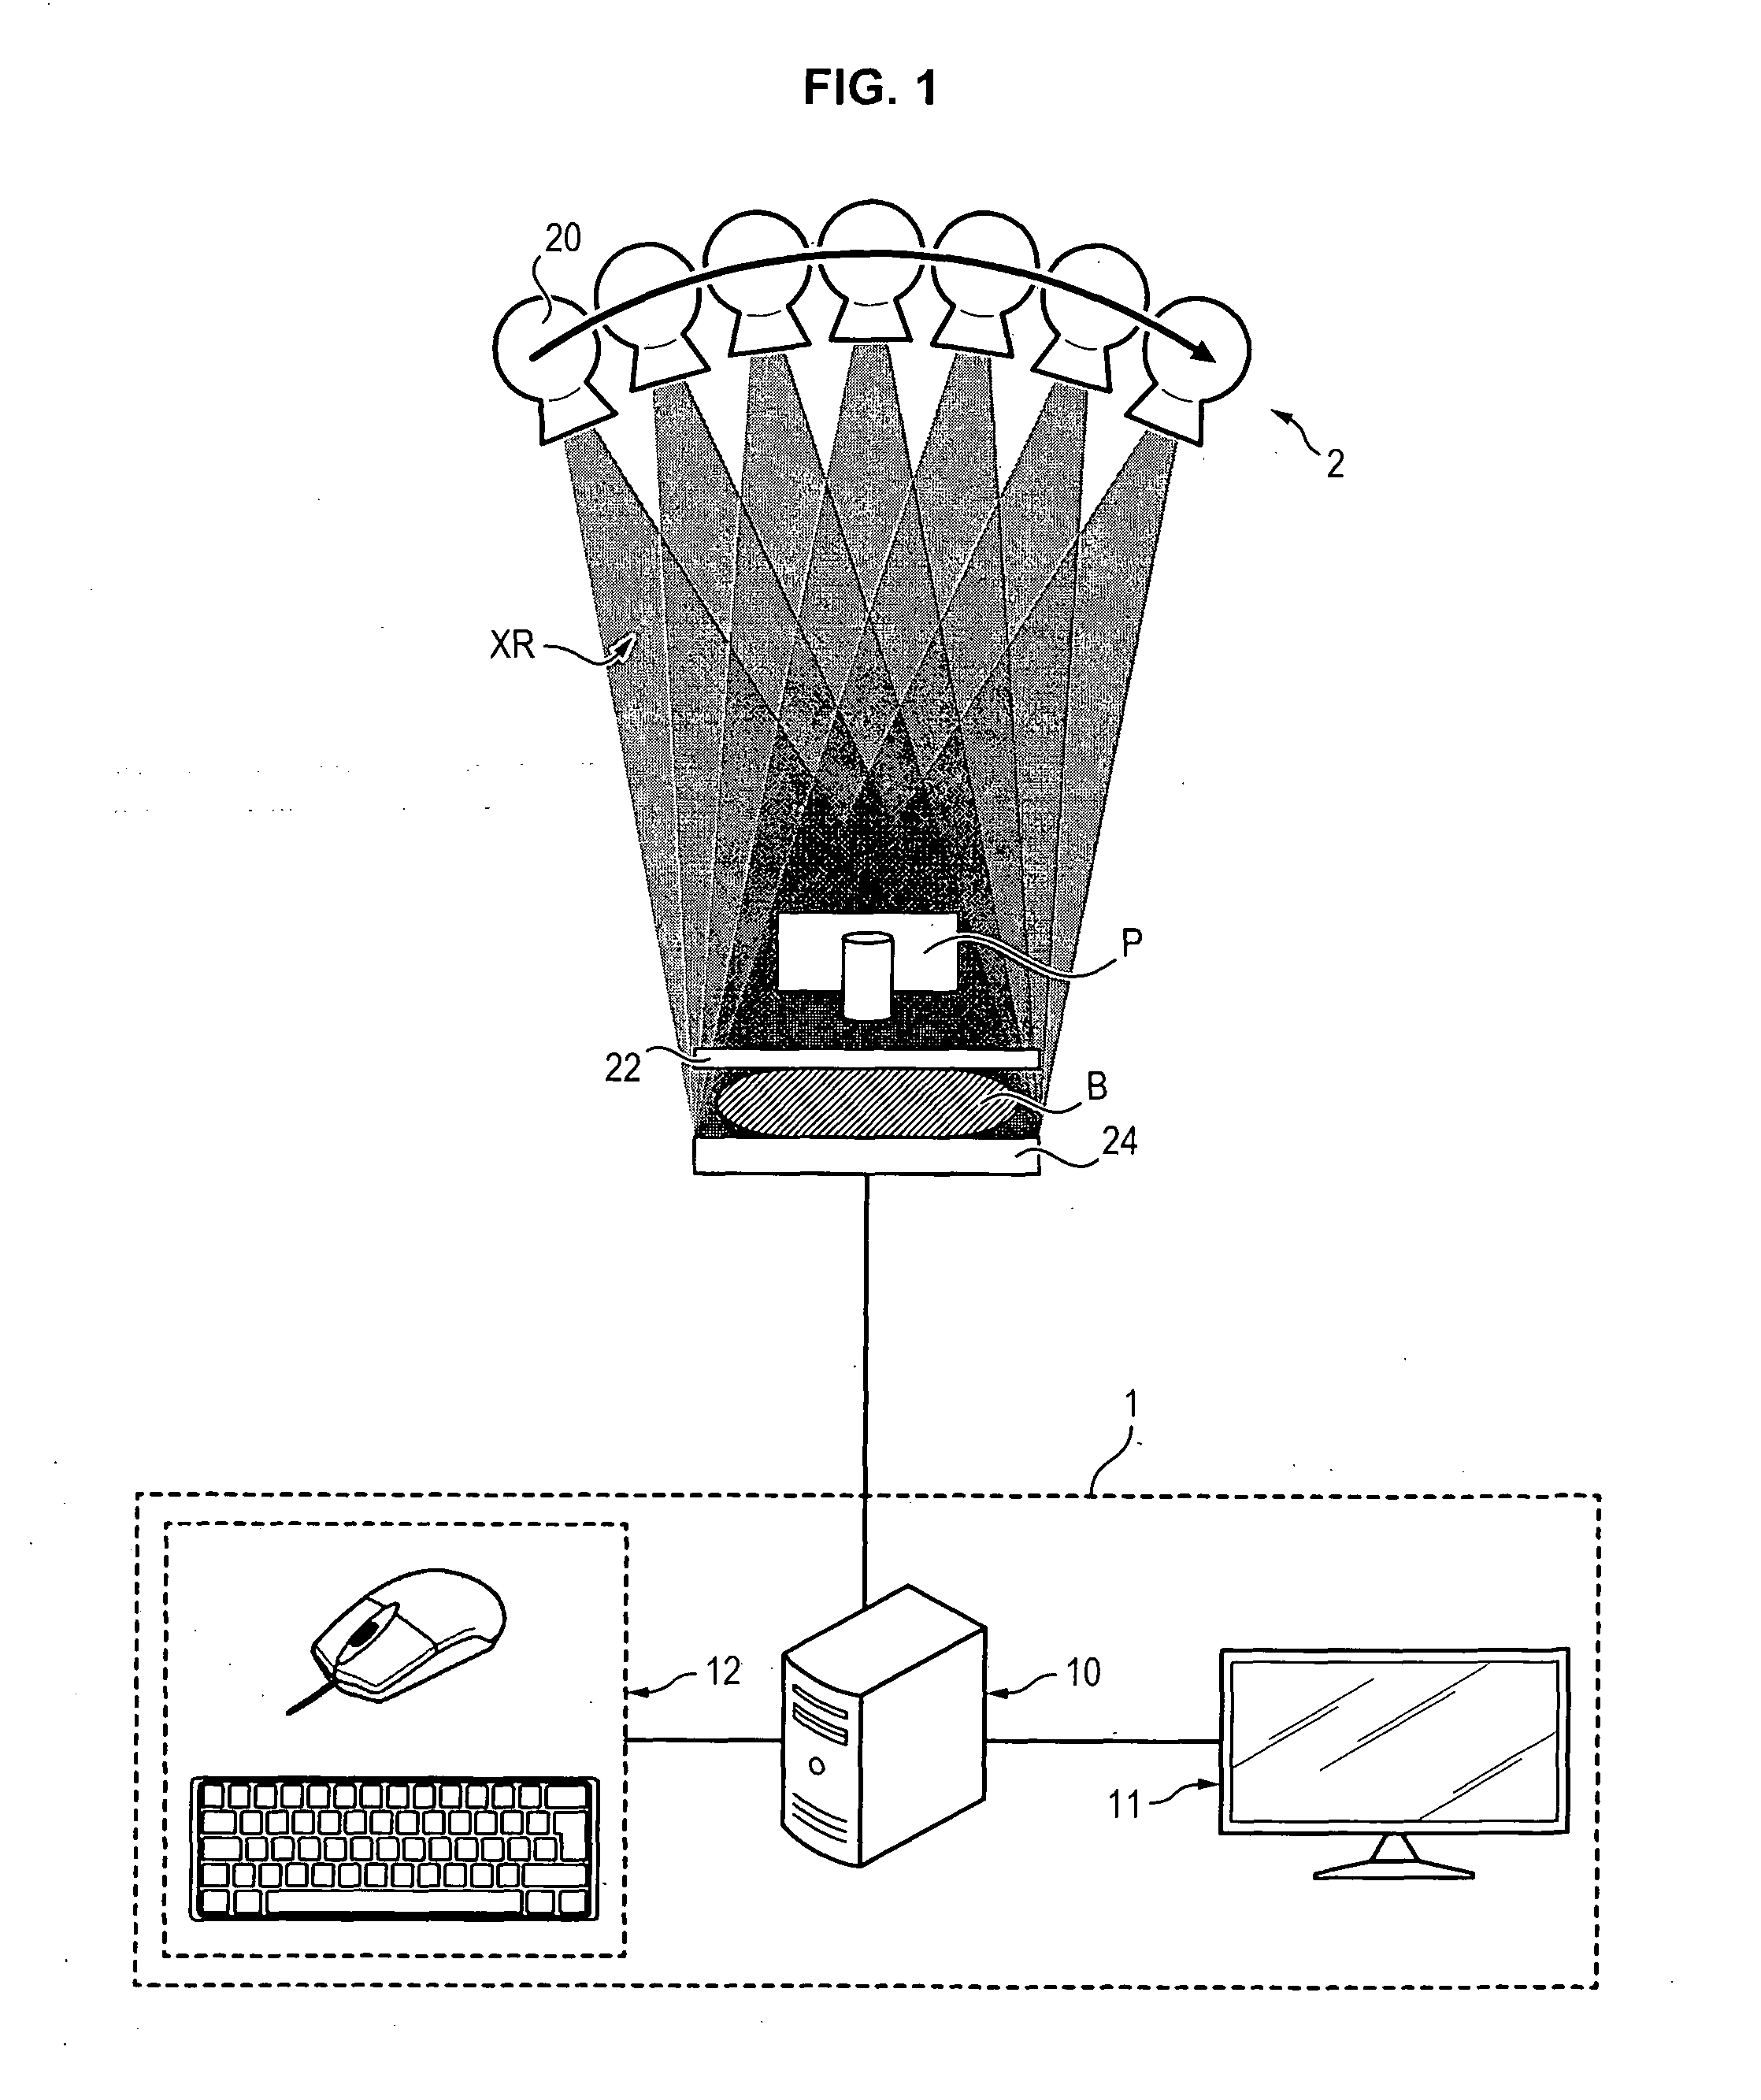 Method of processing x-ray images of a breast